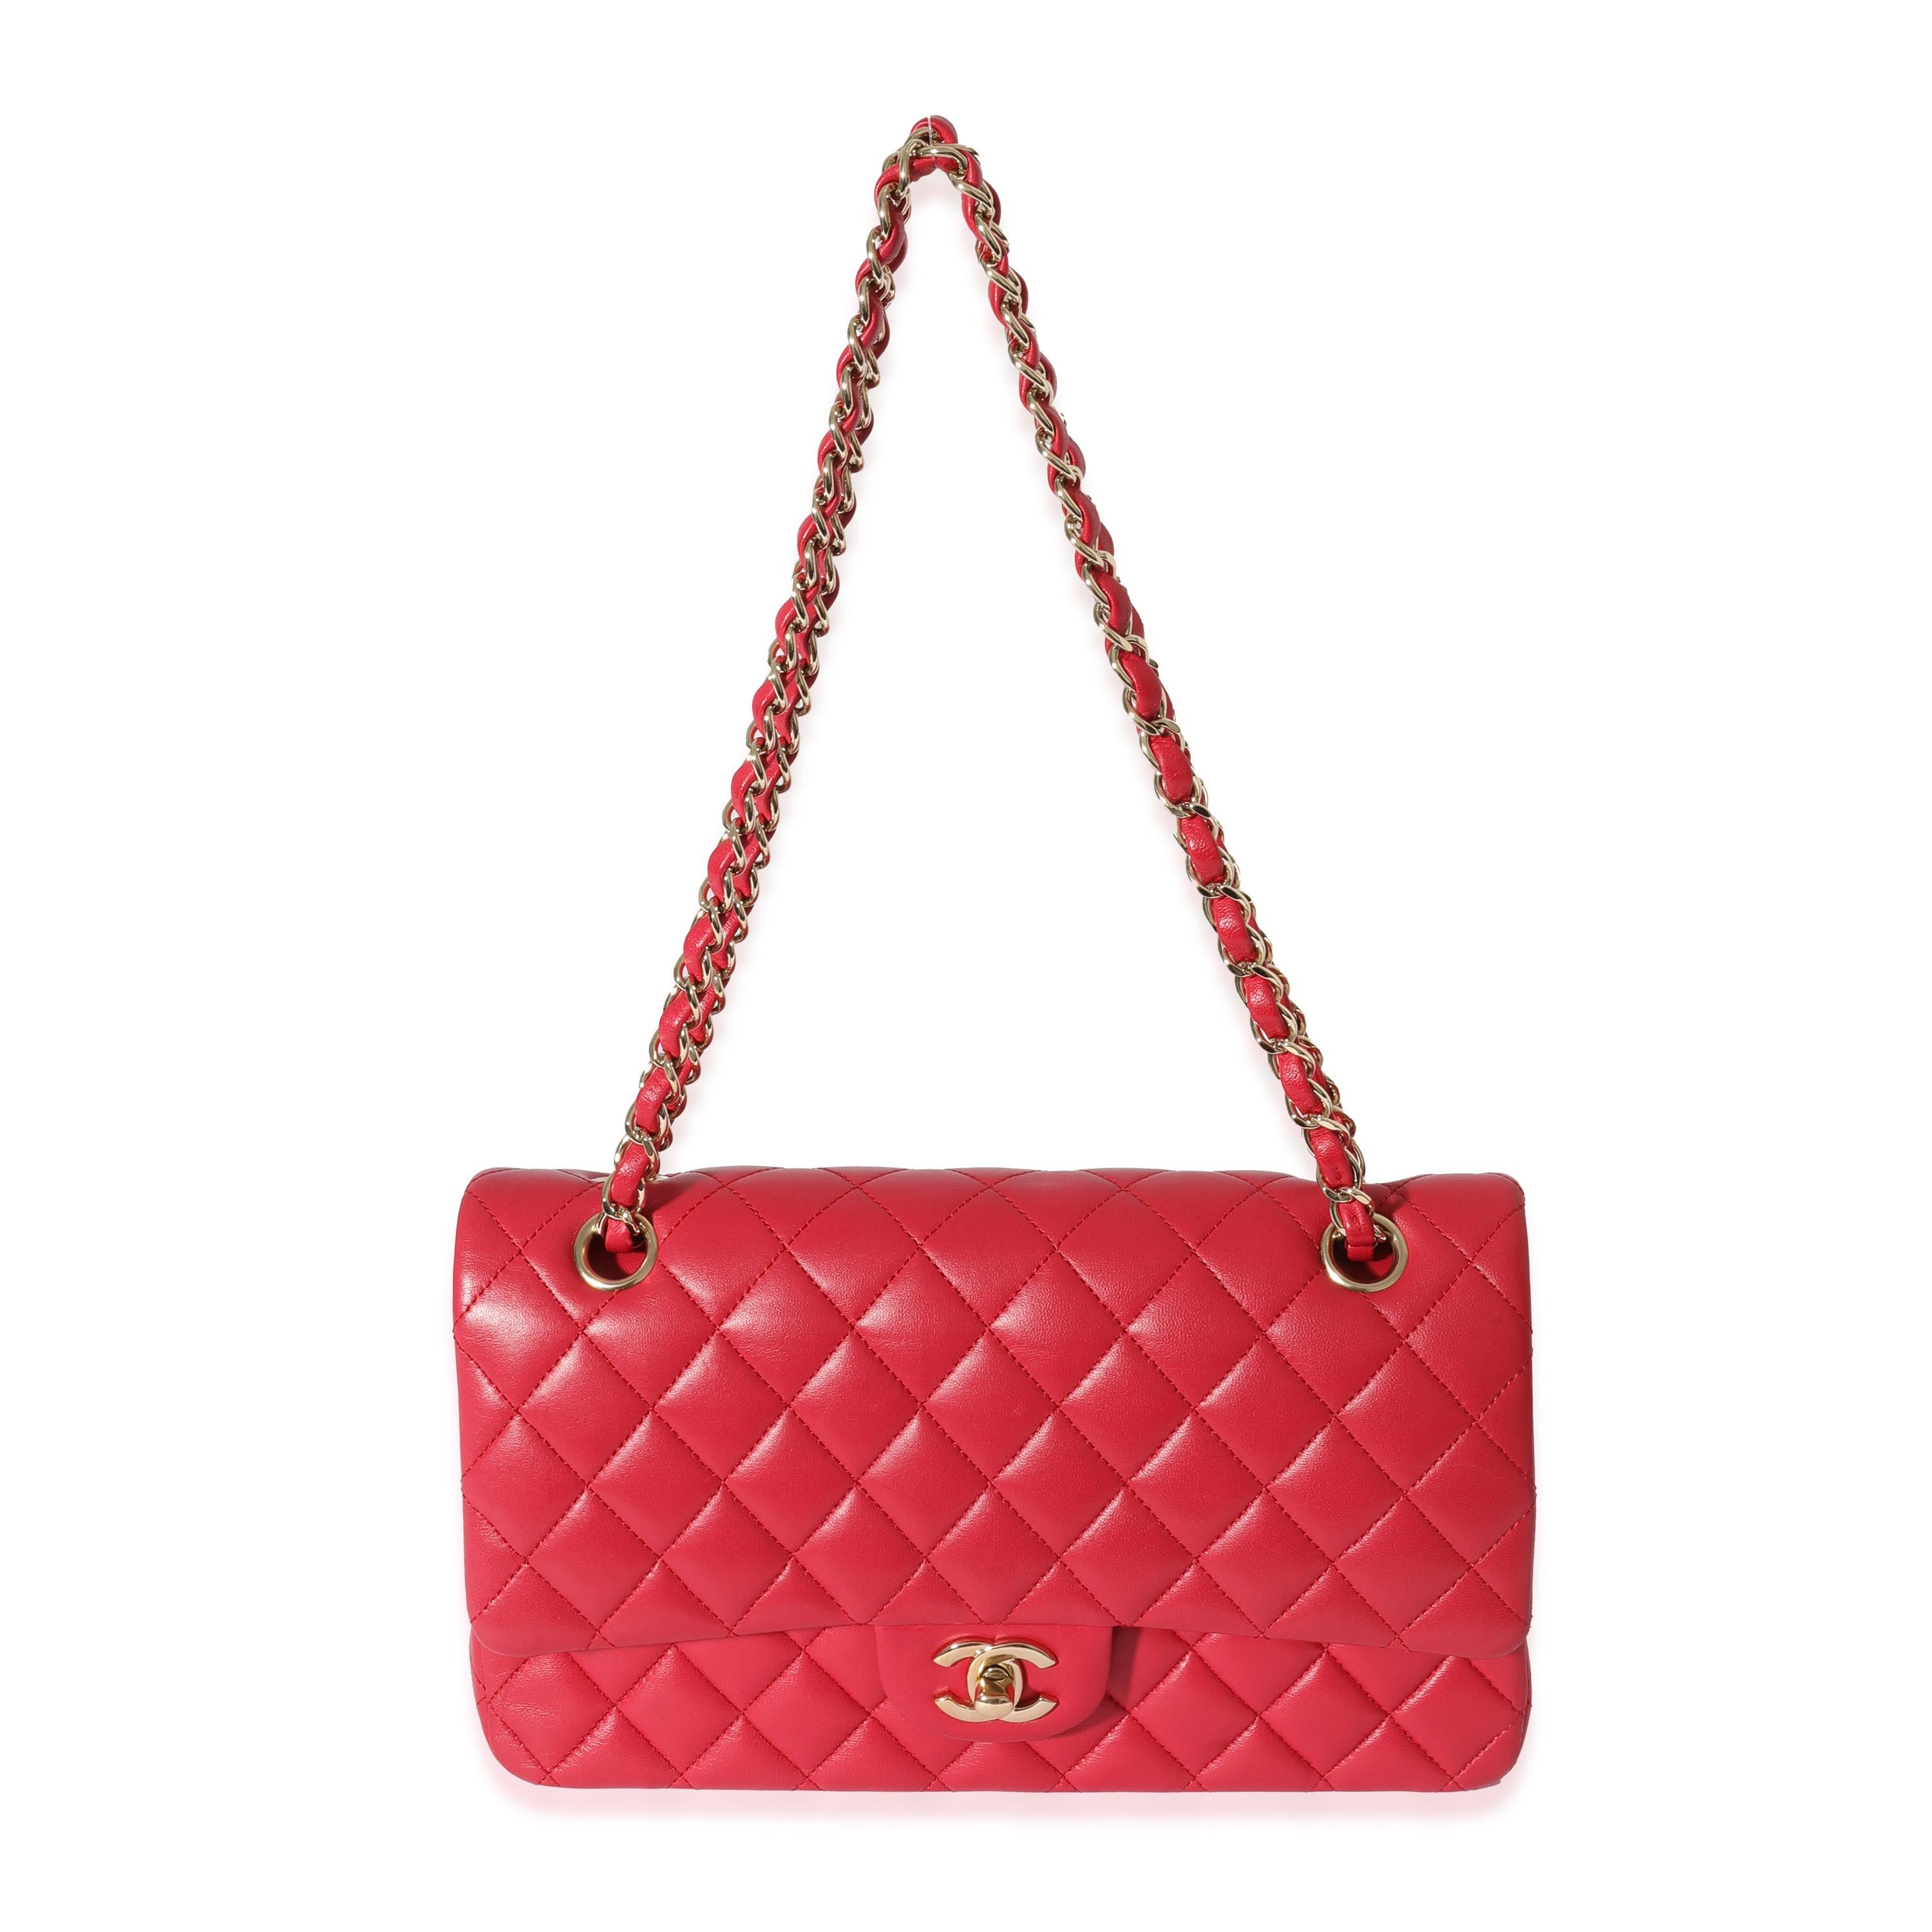 Listing Title: Chanel Dark Pink Lambskin Medium Flap Bag
SKU: 129039
Condition: Pre-owned 
Handbag Condition: Very Good
Condition Comments: Very Good Condition. Exterior corner scuffing and throughout.  Light discoloration. Heavy scratching at